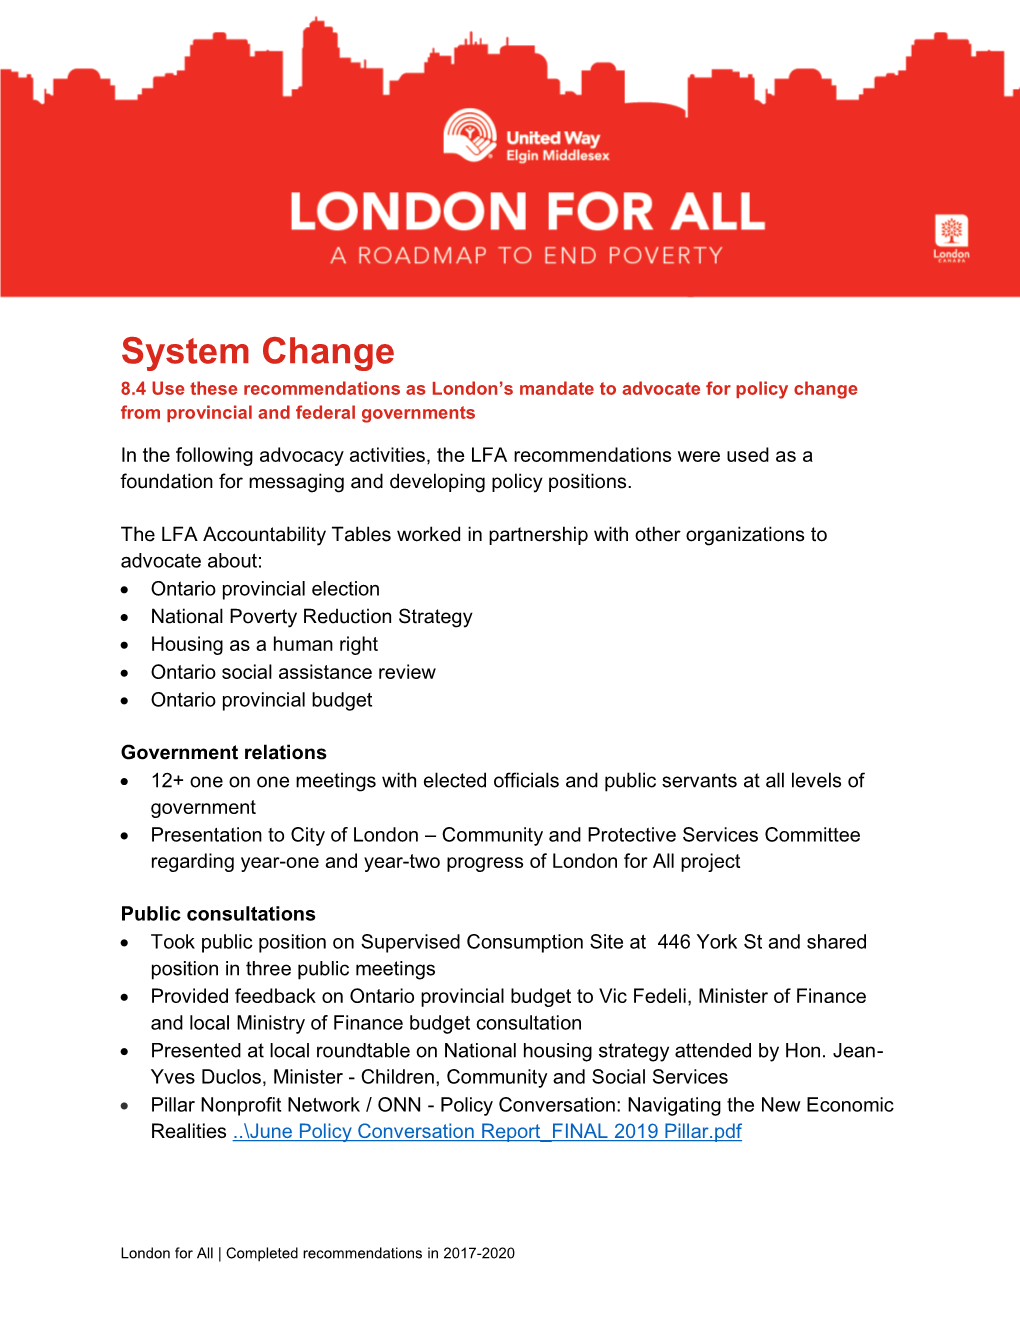 System Change 8.4 Use These Recommendations As London’S Mandate to Advocate for Policy Change from Provincial and Federal Governments